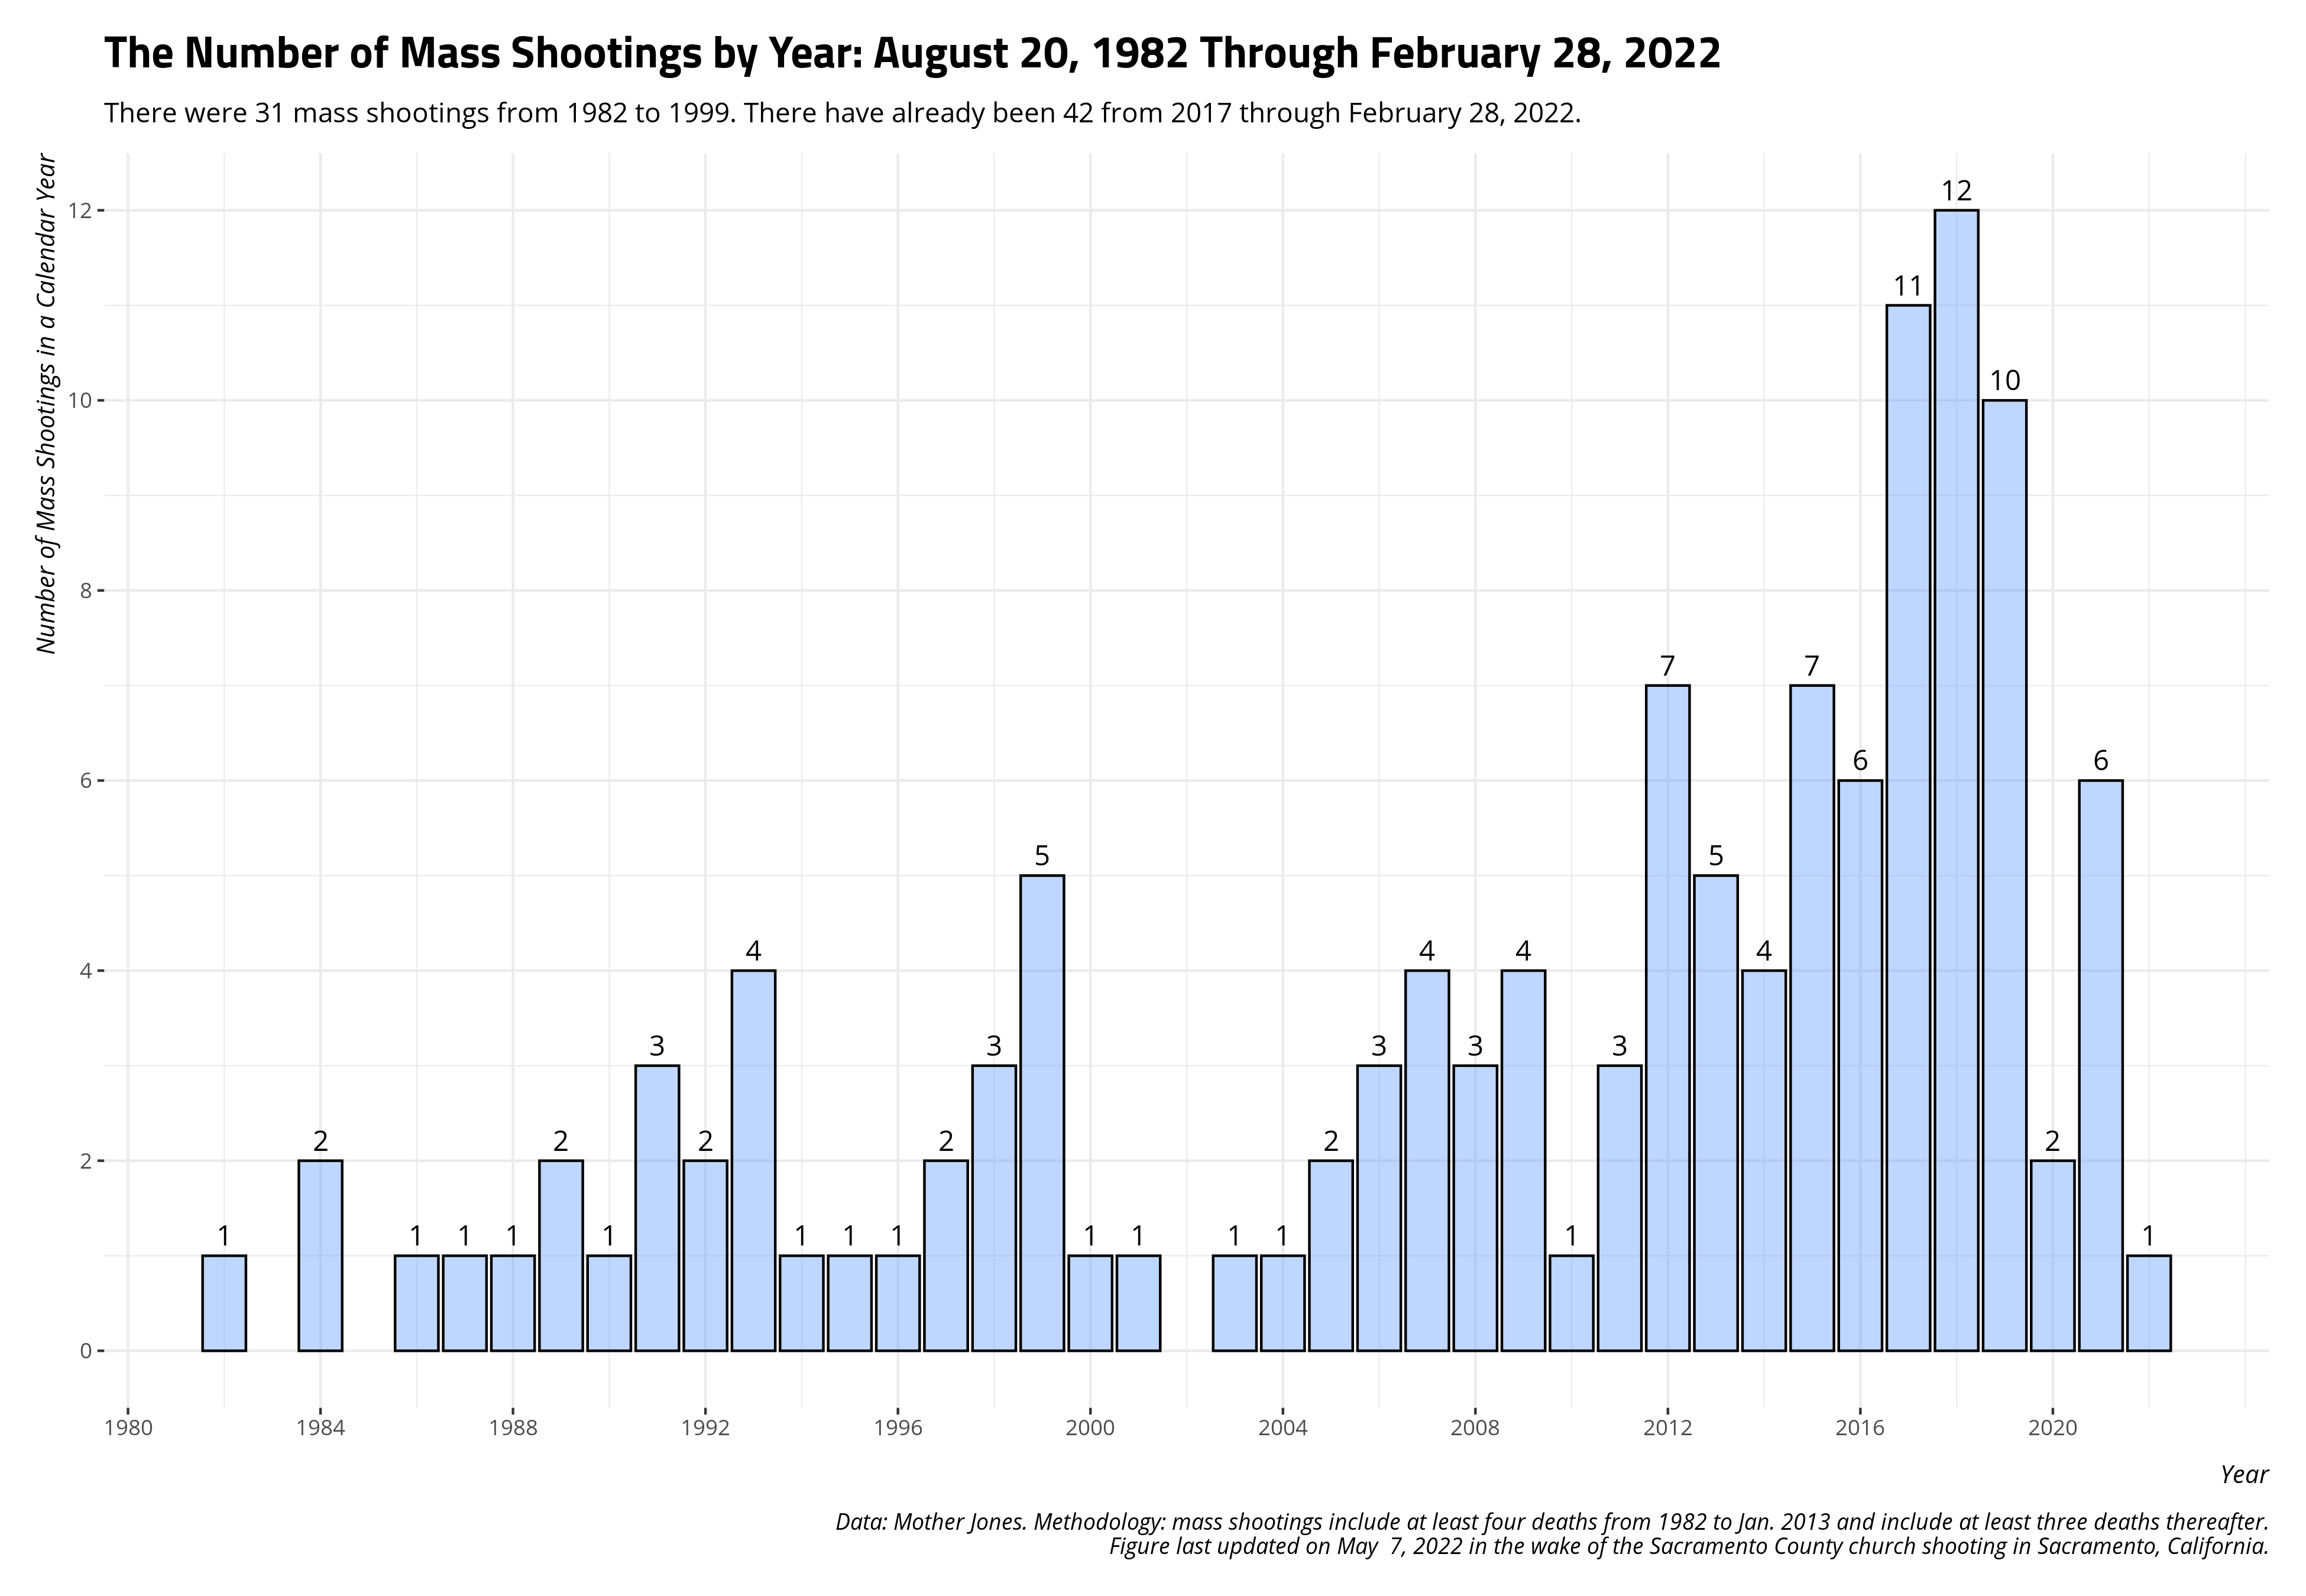 plot of chunk us-mass-shootings-by-year-1982-present